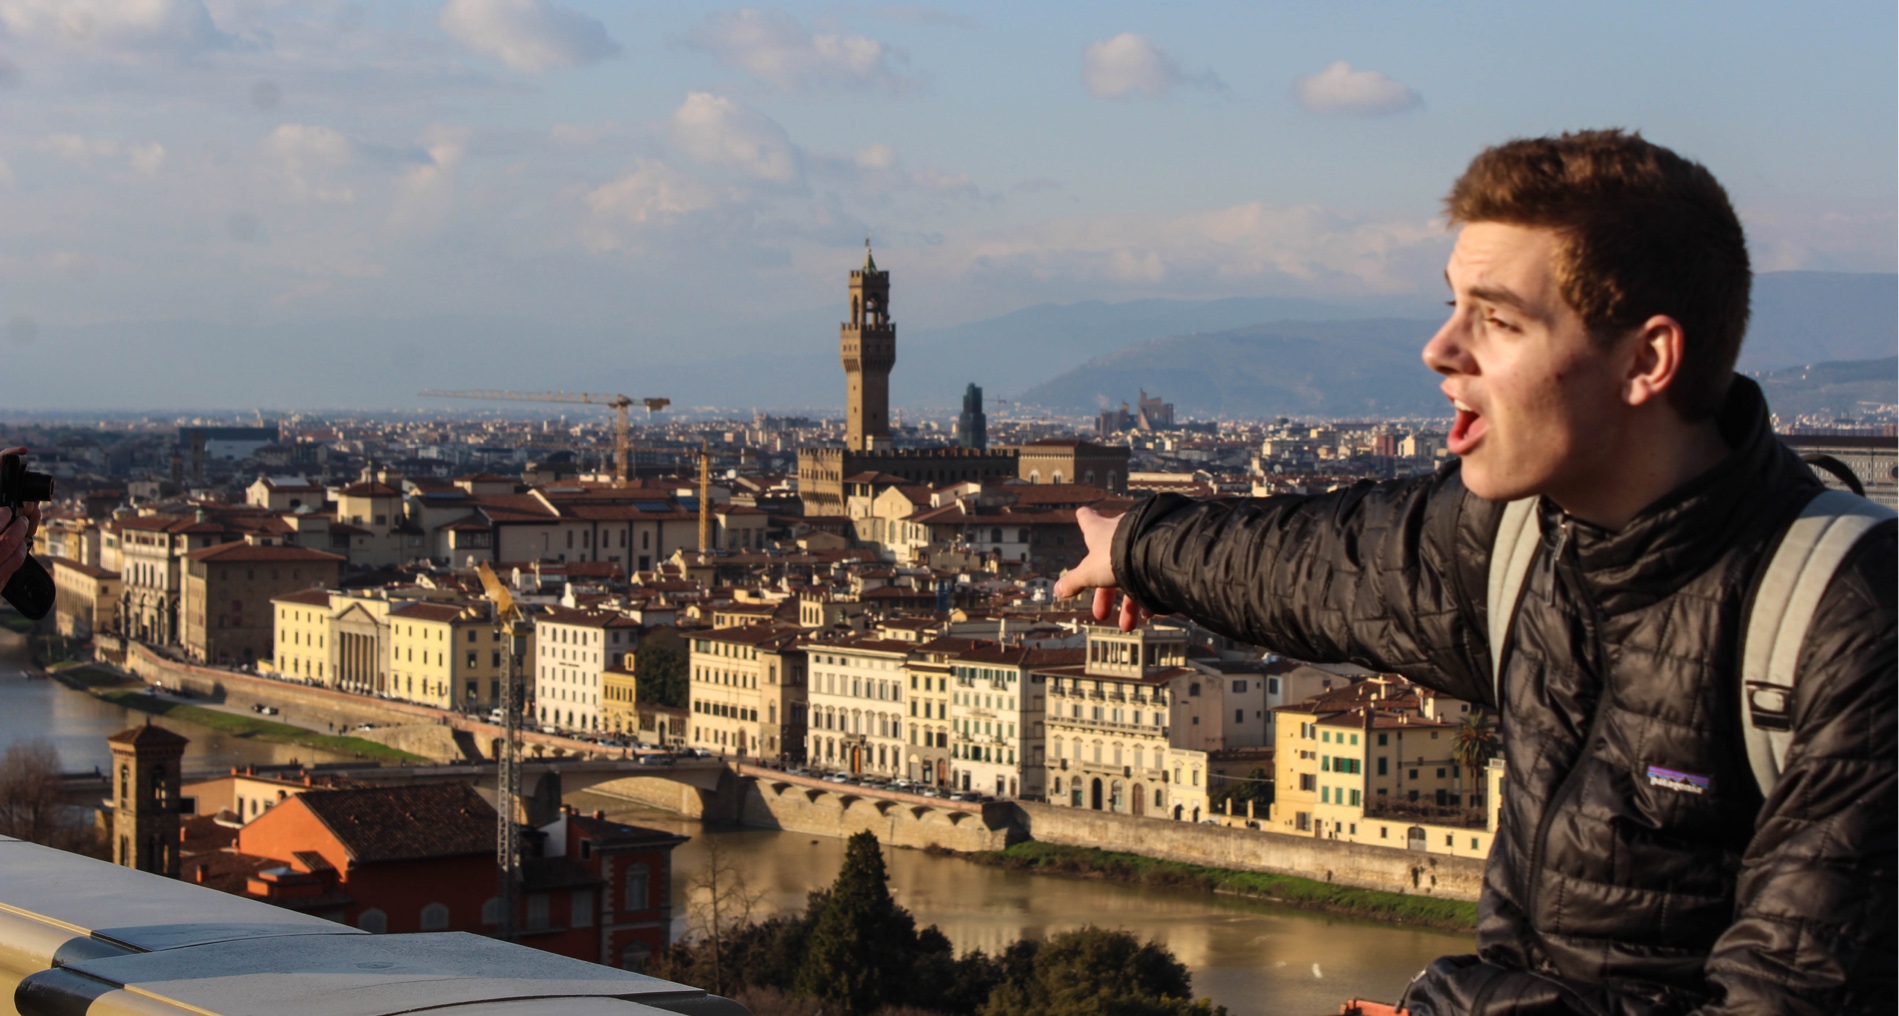 AIFS Abroad student in Florence, Italy